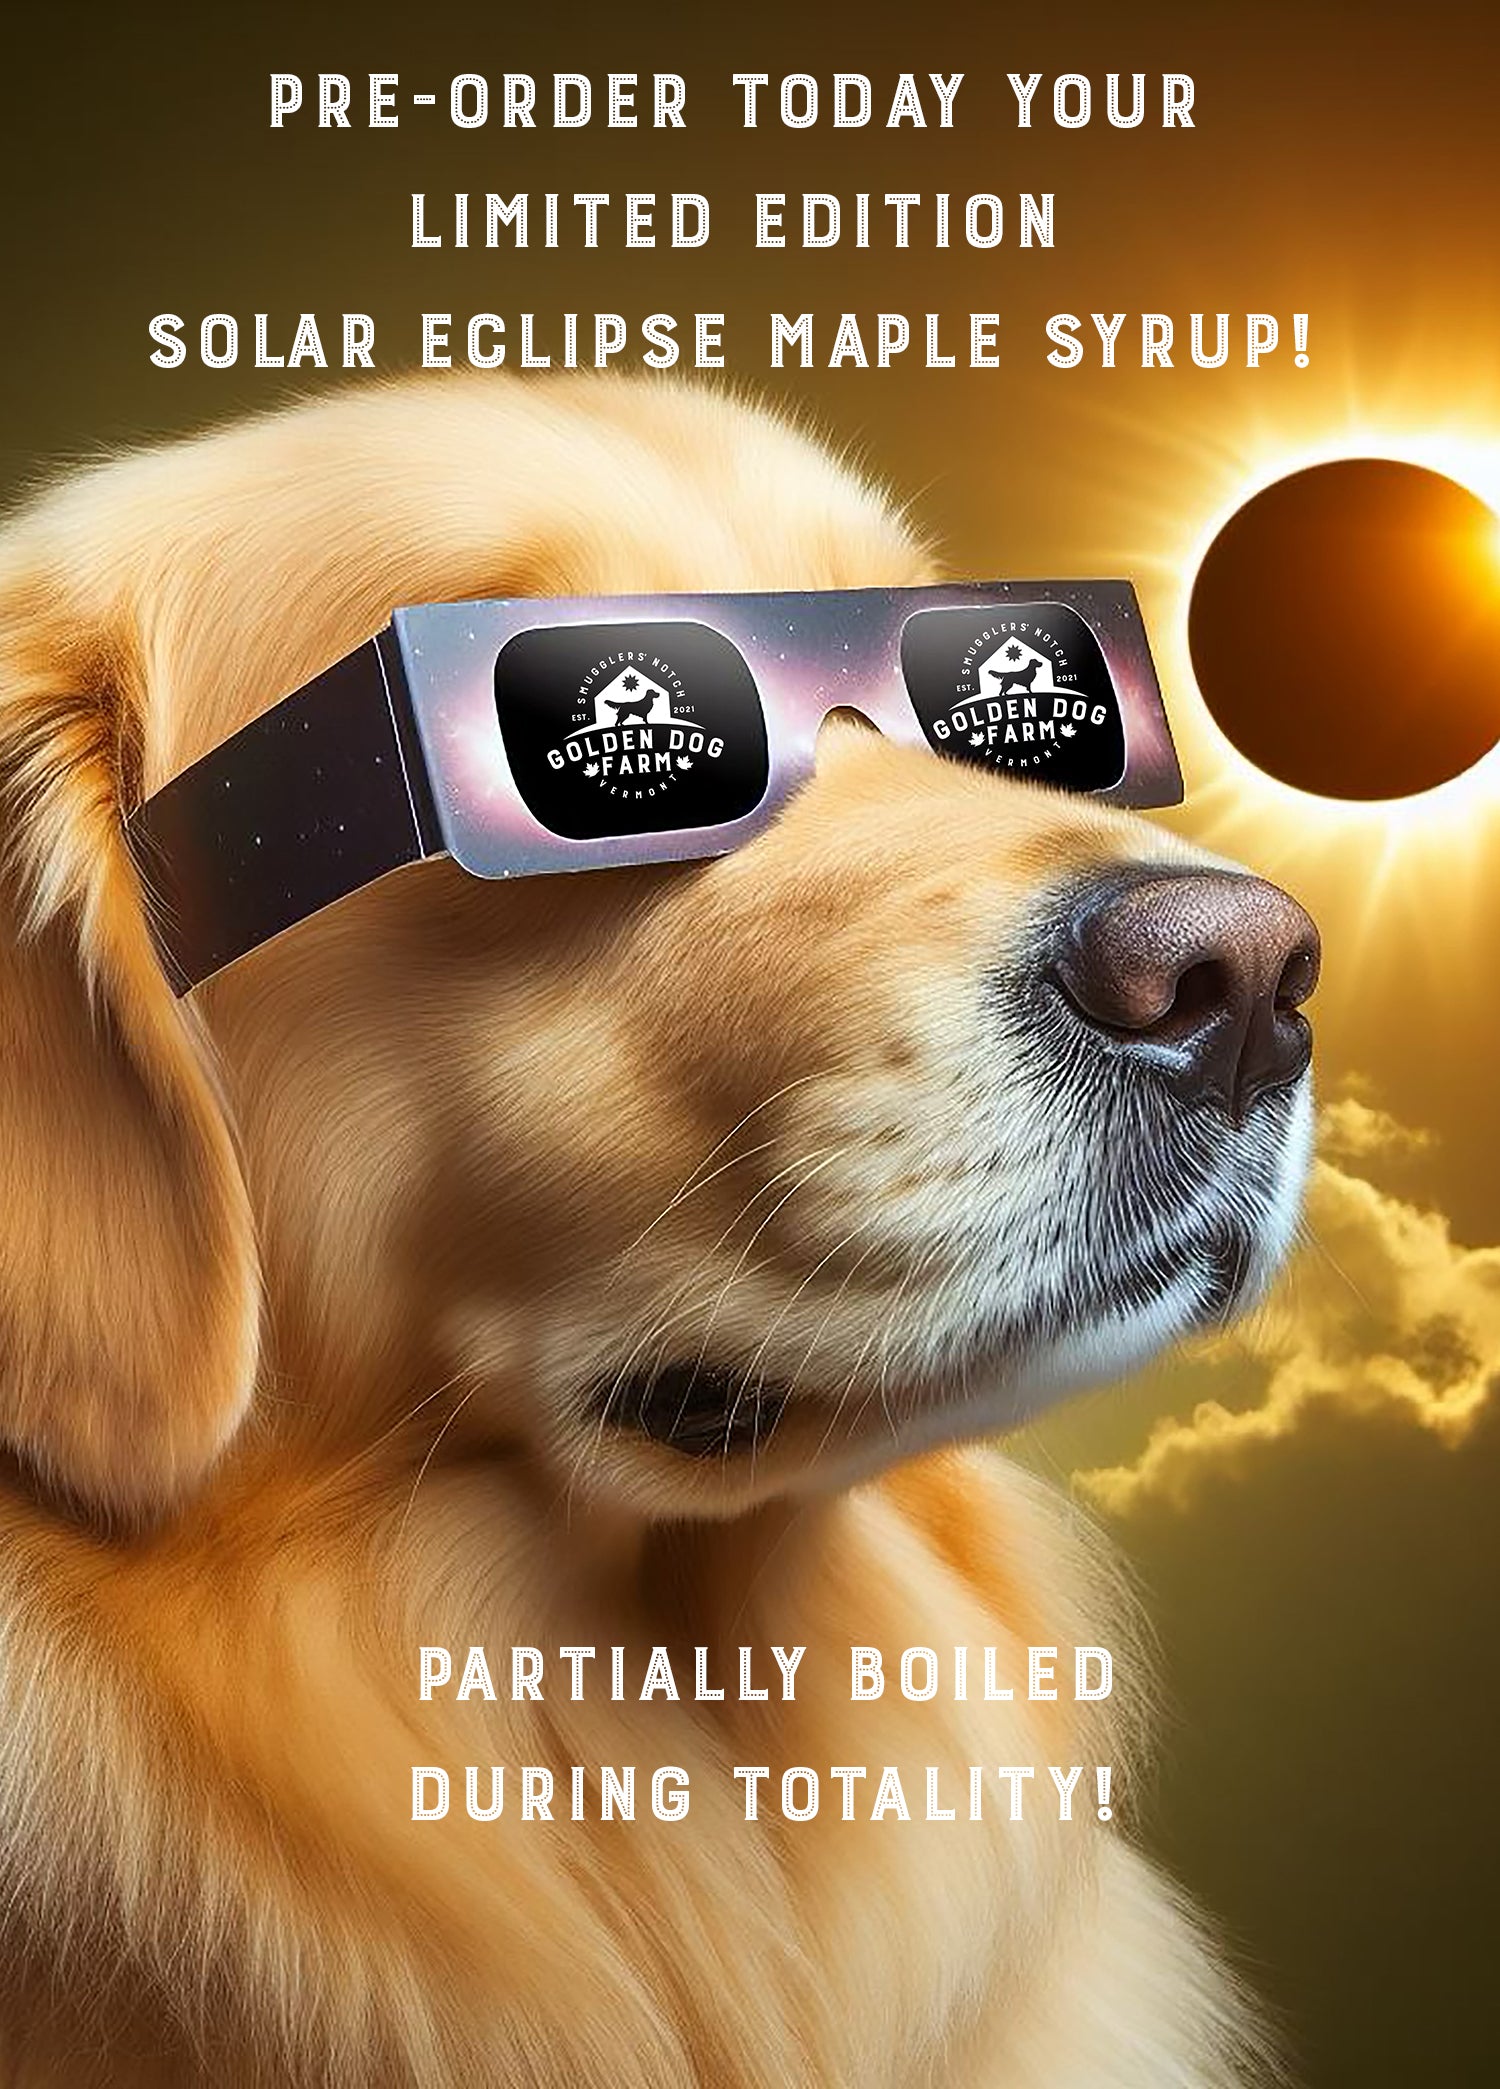 Pre-Order your Limited Edition Total Solar Eclipse Maple Syrup!